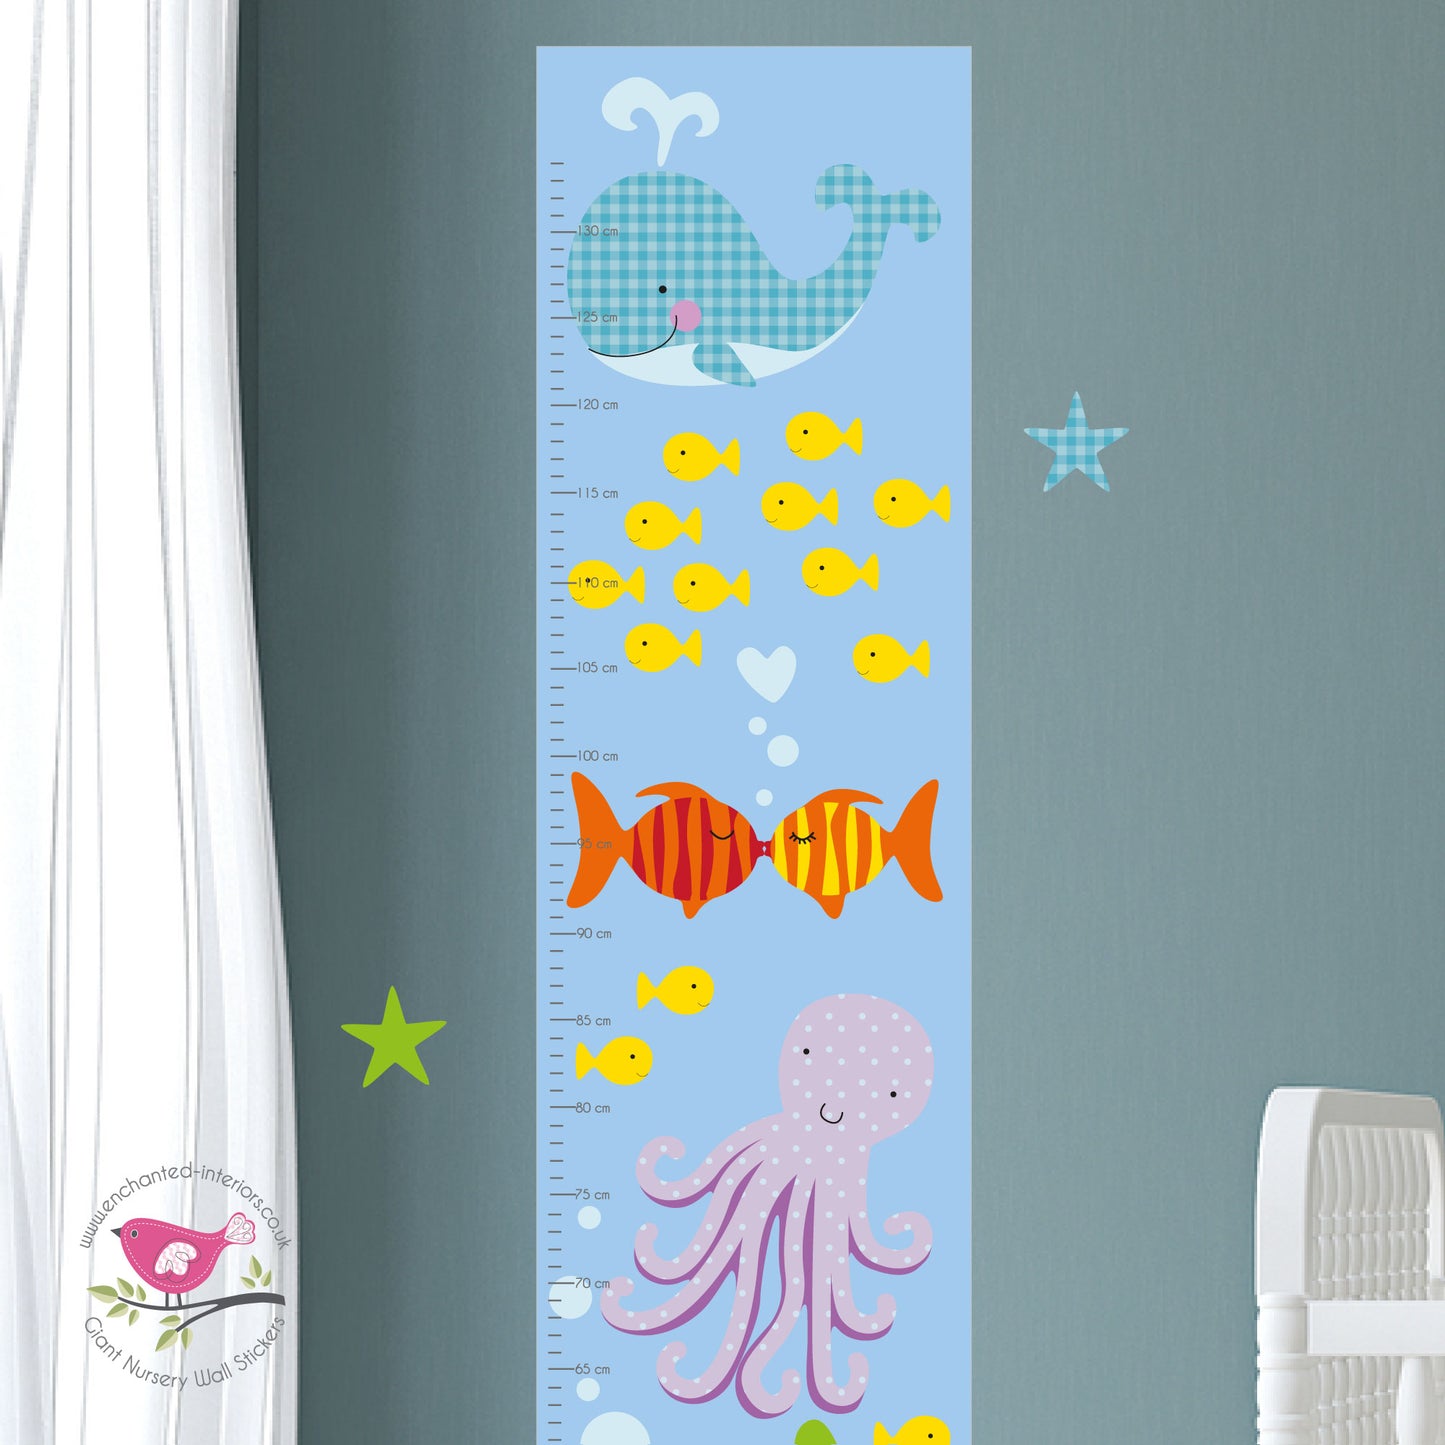 Under Water Growth Chart Decal